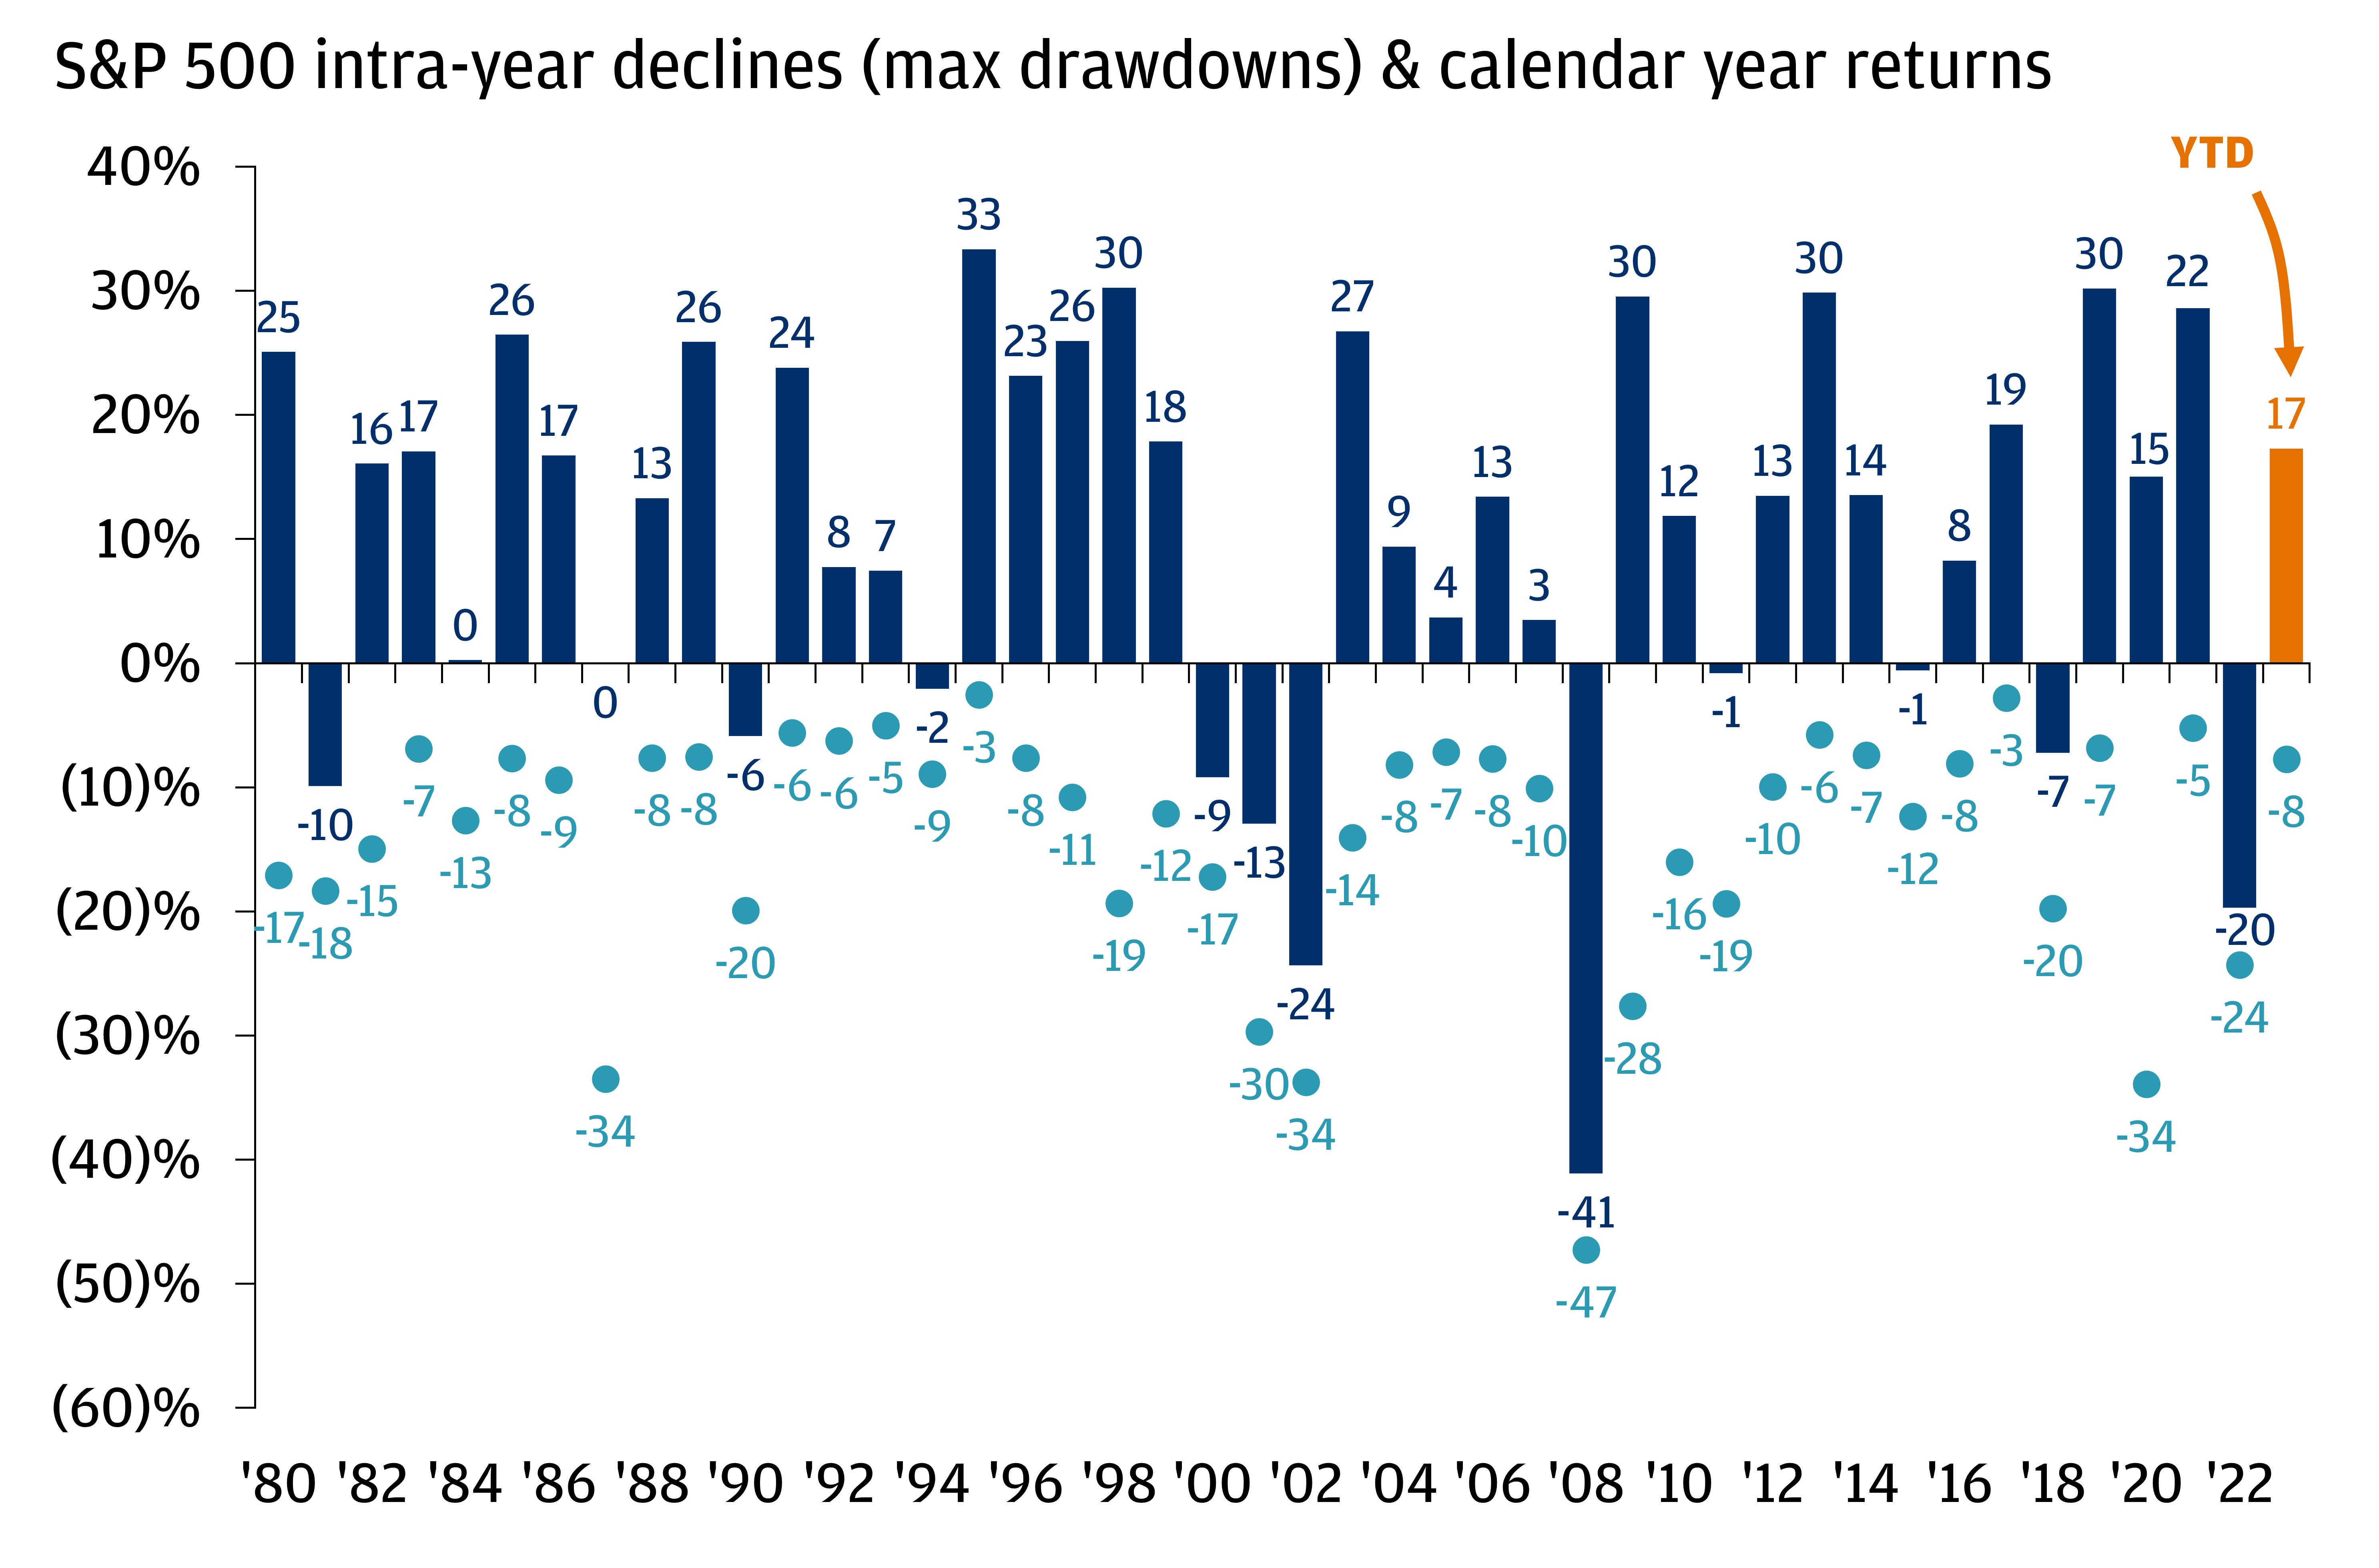 This chart shows how stocks tend to reward long-term investors by showing S&P 500 intra-year declines (max drawdowns) and calendar-year returns. 